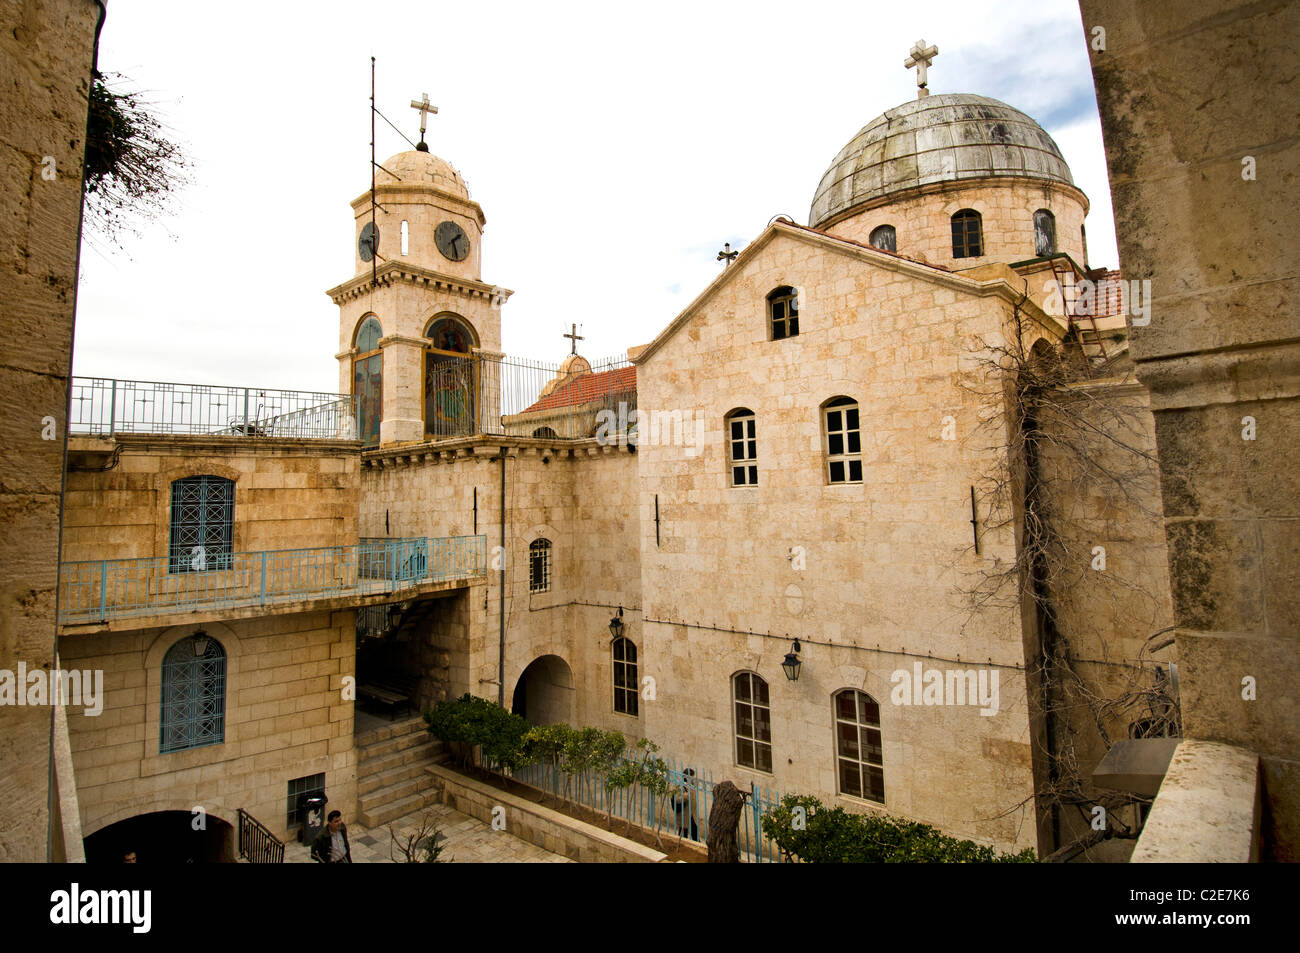 Convent Our Lady of Sayidnaya  monastery  Seidnaya  547 AD  near Damascus  Syria Virgin Mary appeared to Emperor Justinian Stock Photo